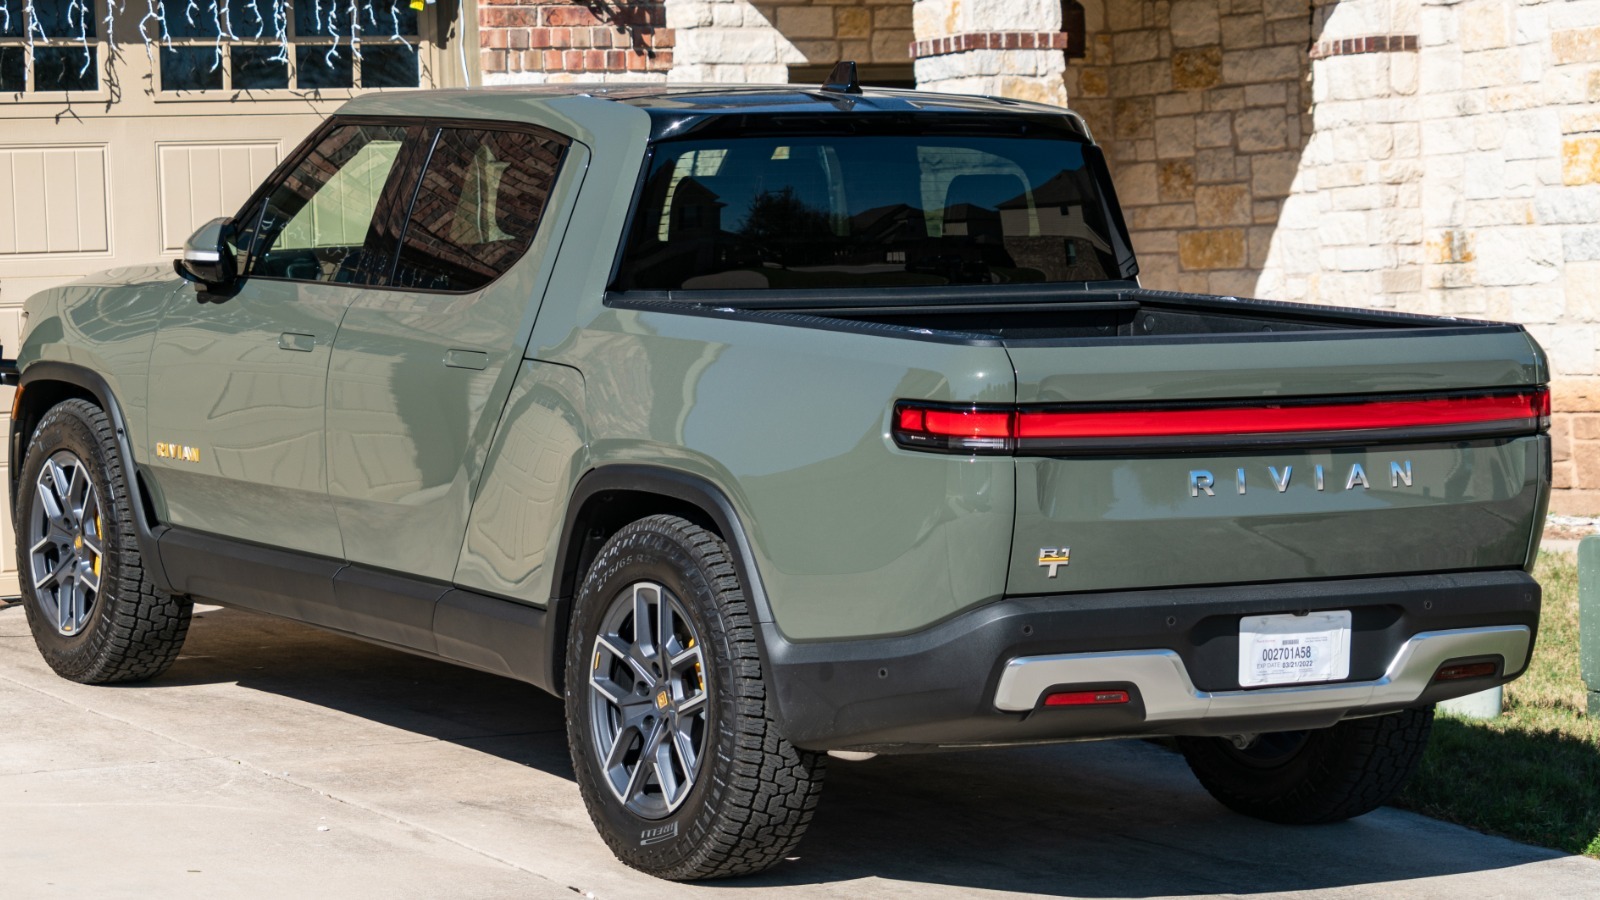 Rivian Is Inviting R1T Reservation Holders To Order Their New EVs – SlashGear